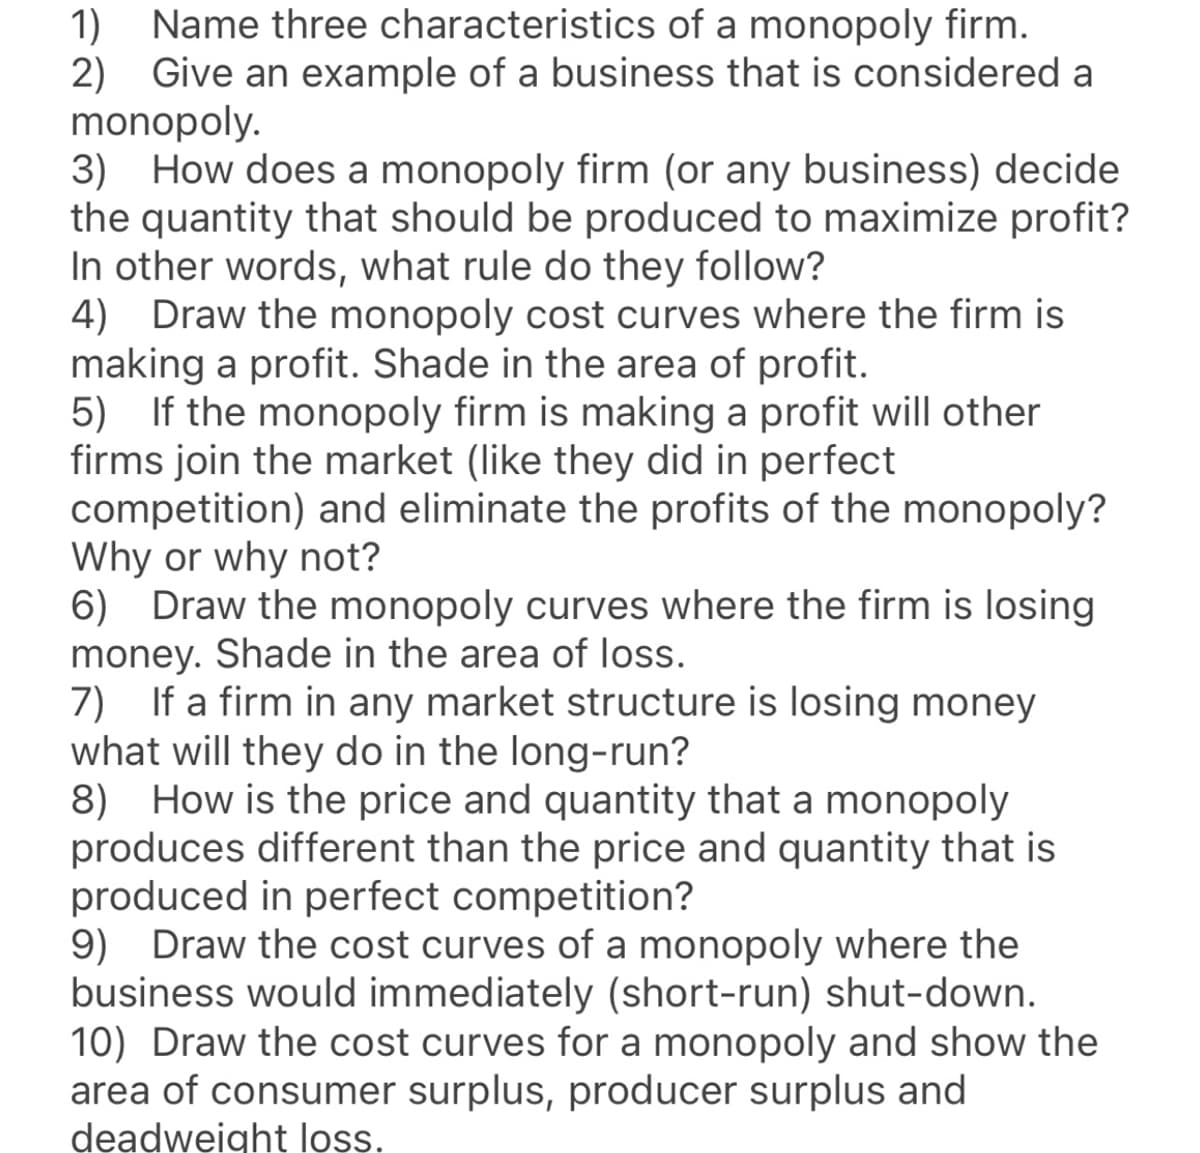 Name three characteristics of a monopoly firm.
2) Give an example of a business that is considered a
monopoly.
3) How does a monopoly firm (or any business) decide
the quantity that should be produced to maximize profit?
In other words, what rule do they follow?
4)
1)
Draw the monopoly cost curves where the firm is
making a profit. Shade in the area of profit.
5) If the monopoly firm is making a profit will other
firms join the market (like they did in perfect
competition) and eliminate the profits of the monopoly?
Why or why not?
6) Draw the monopoly curves where the firm is losing
money. Shade in the area of loss.
7) If a firm in any market structure is losing money
what will they do in the long-run?
8) How is the price and quantity that a monopoly
produces different than the price and quantity that is
produced in perfect competition?
9) Draw the cost curves of a monopoly where the
business would immediately (short-run) shut-down.
10) Draw the cost curves for a monopoly and show the
area of consumer surplus, producer surplus and
deadweight ls.
